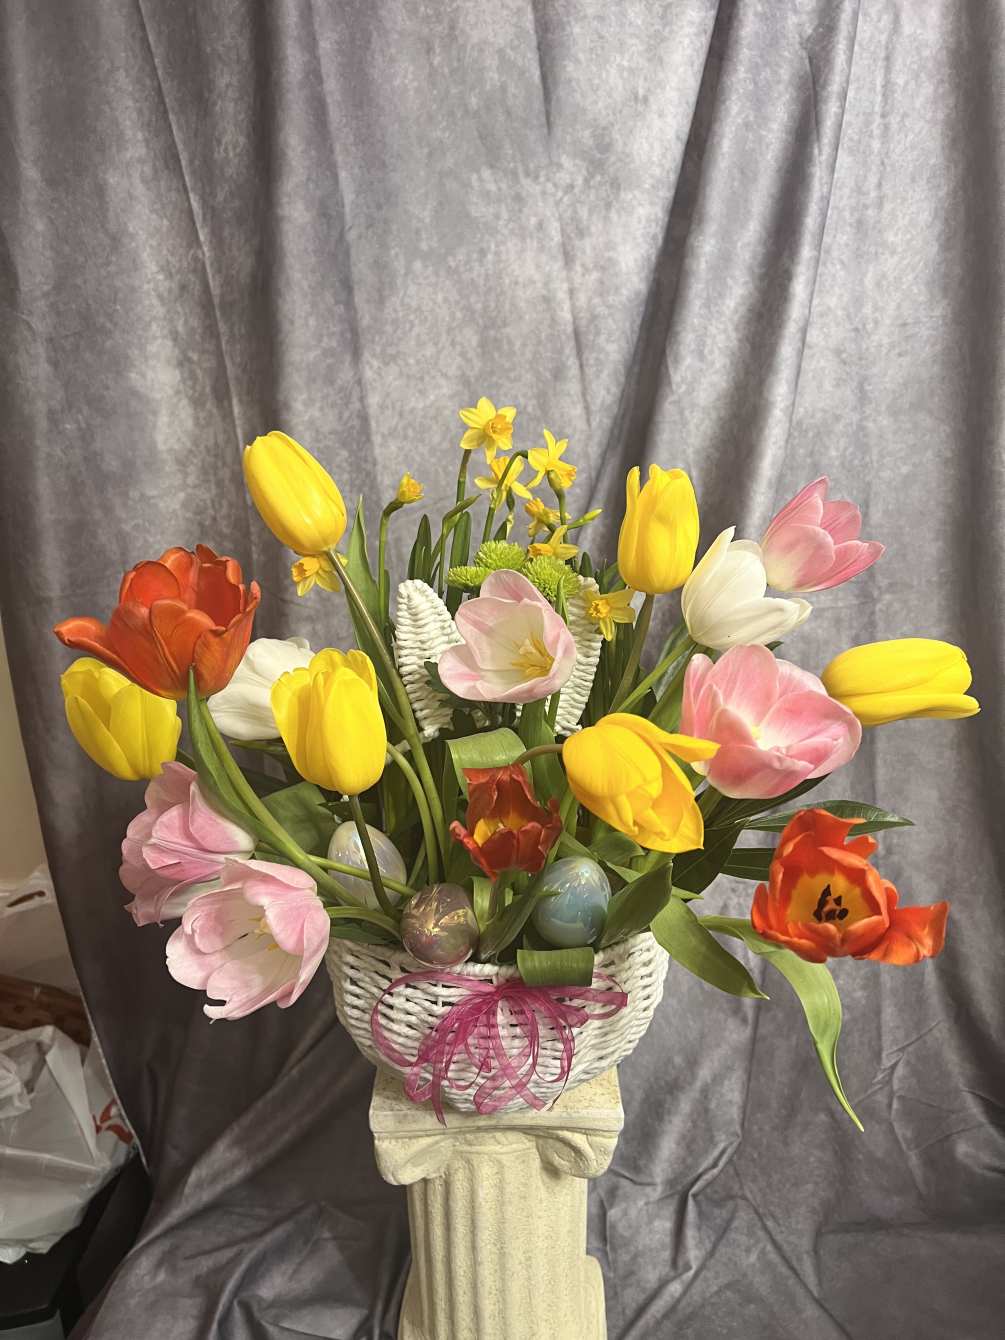 Tulips and spring variety in white bunny ears basket